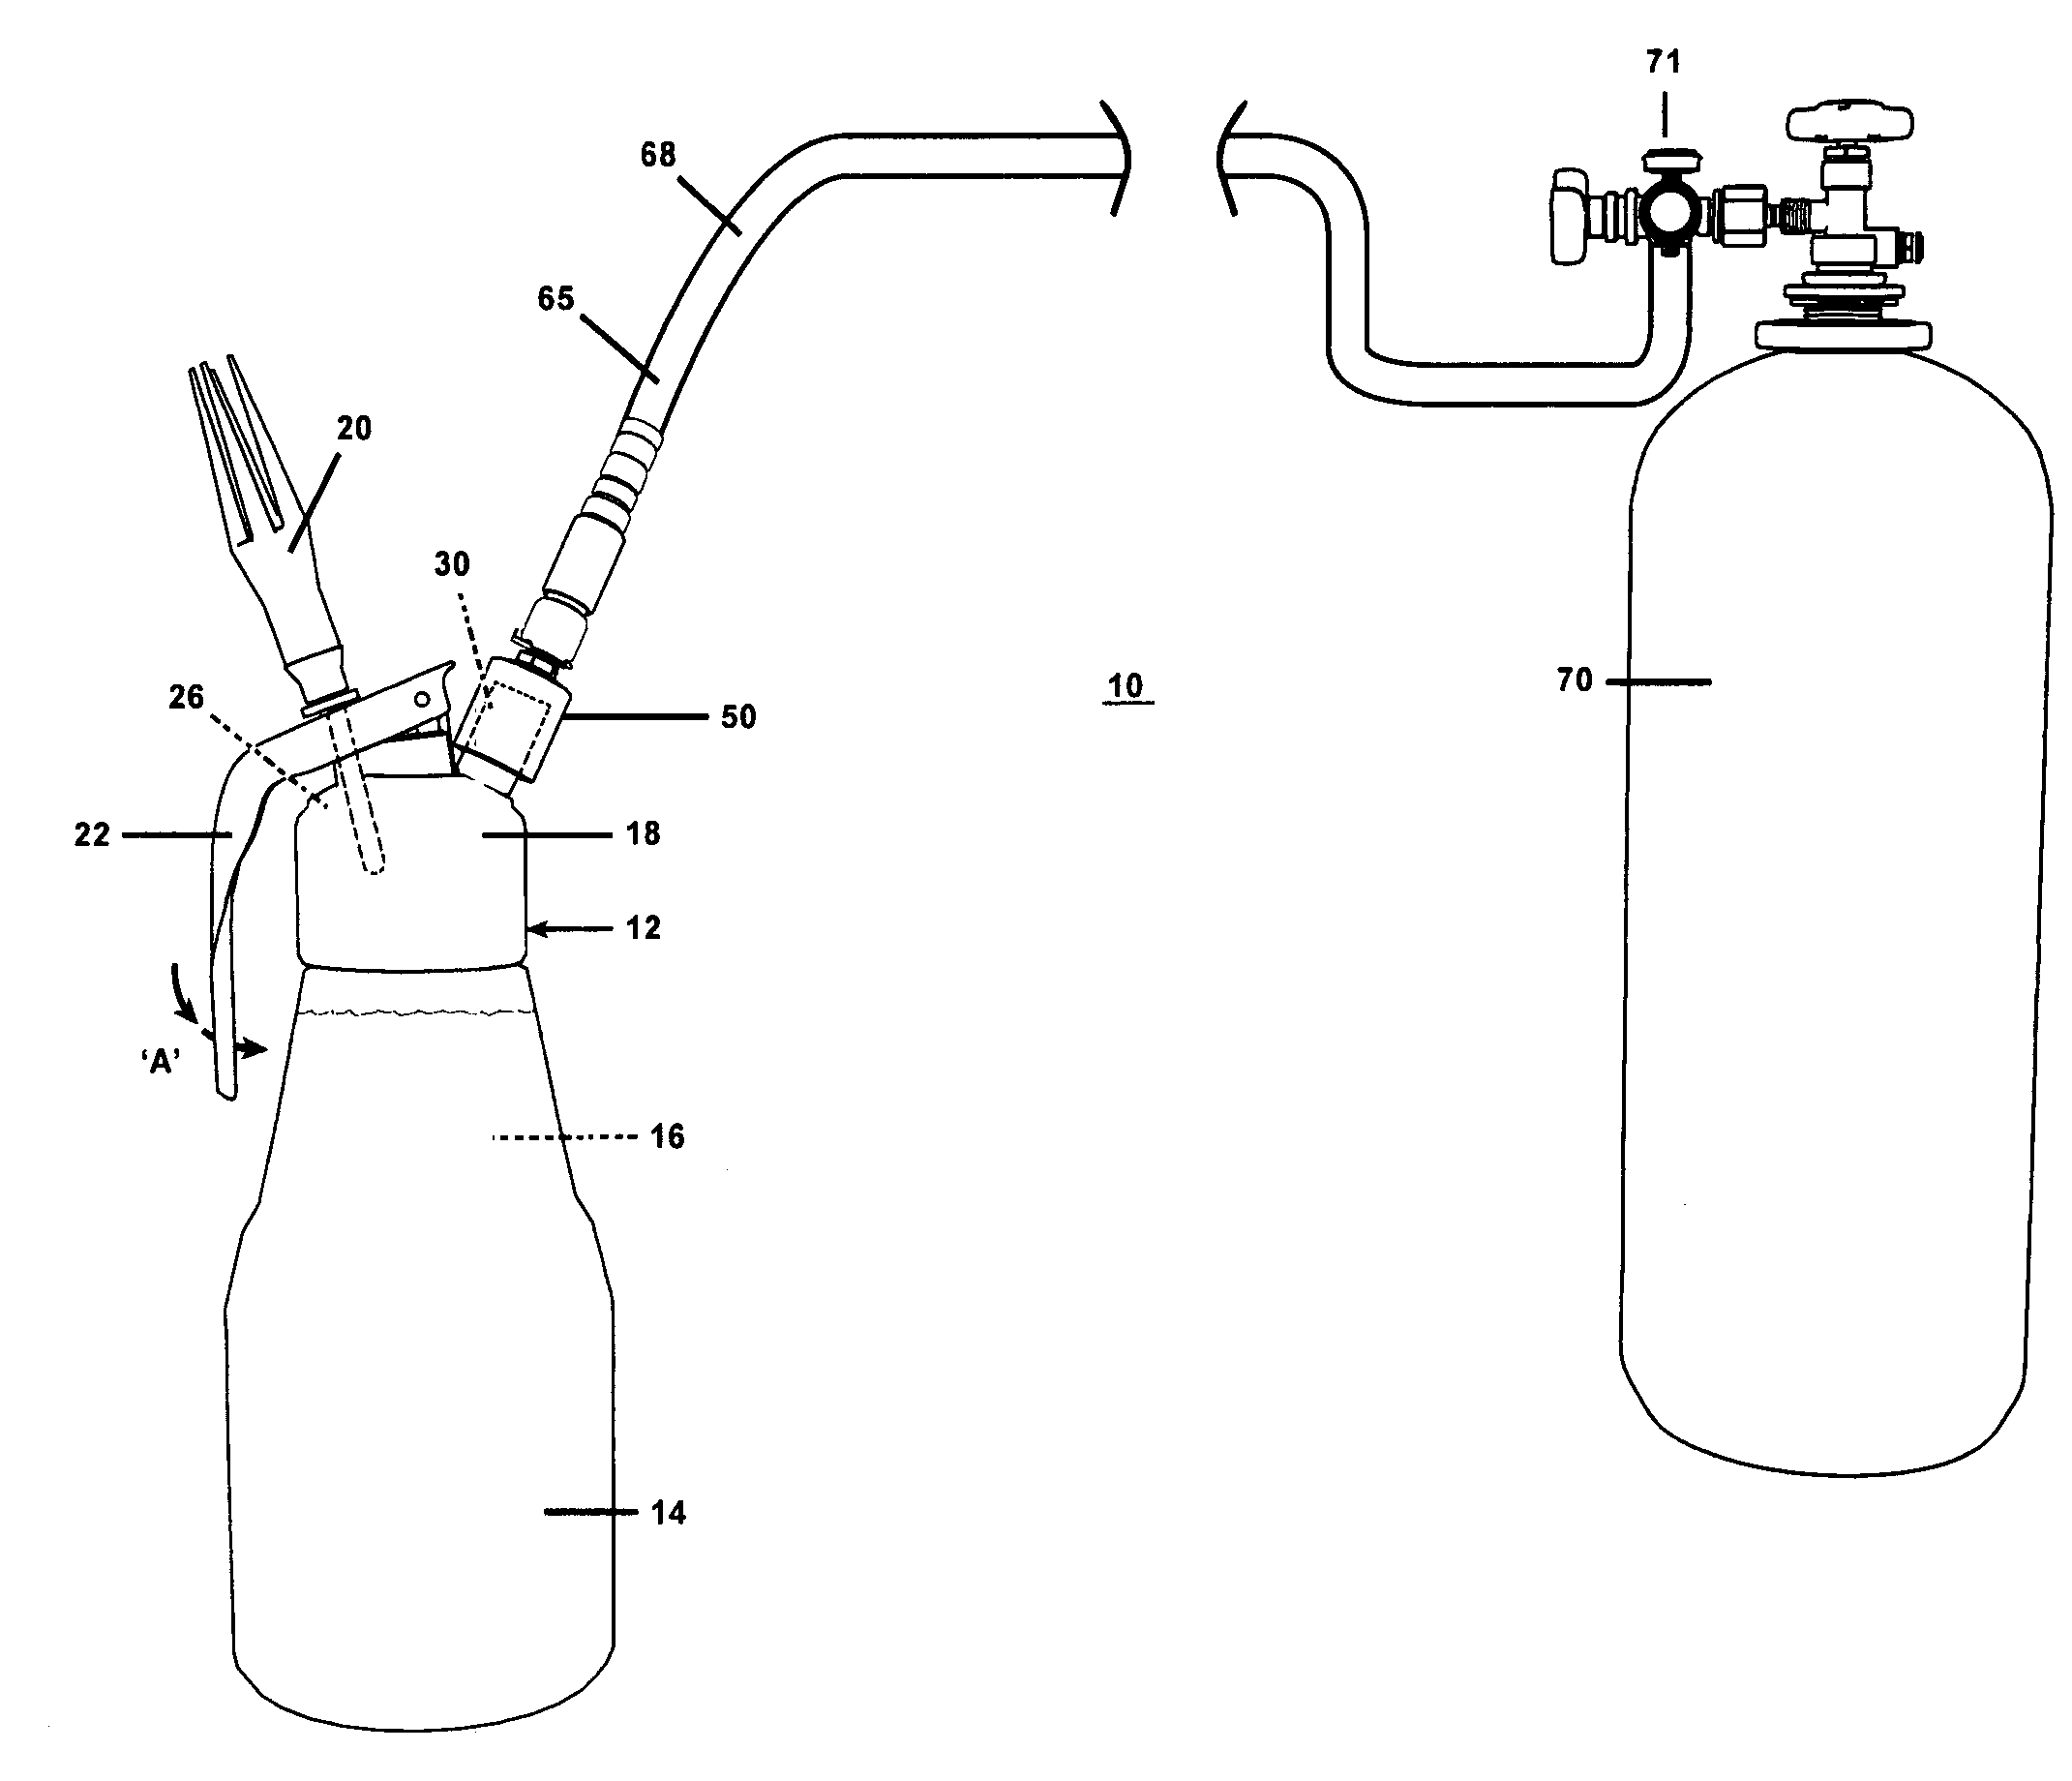 Remote pressure system for portable whipped cream dispensers